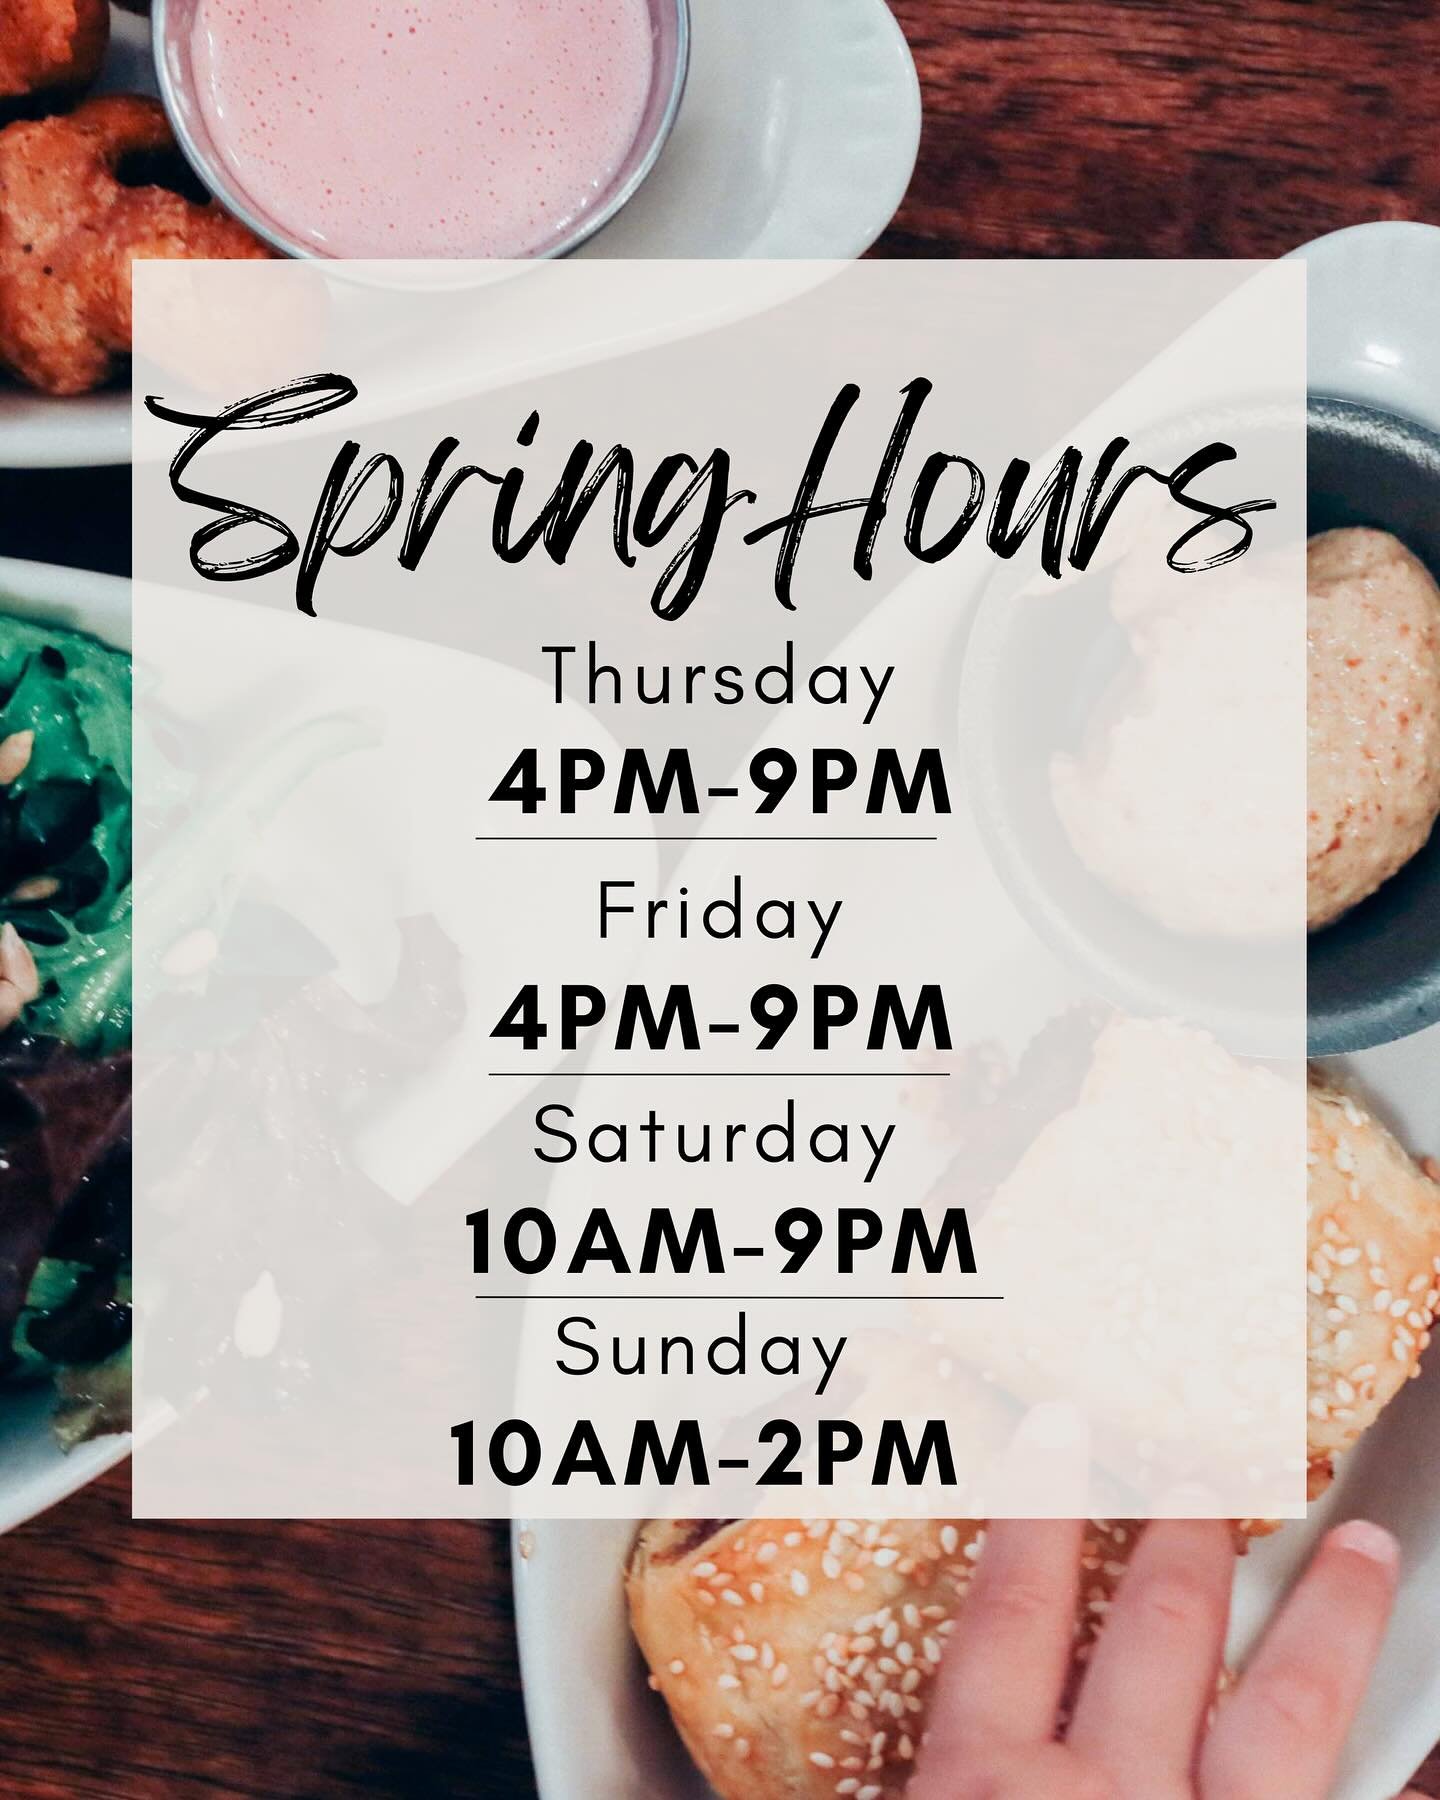 Updated Hours to include our 10AM Saturday brunch, which is available until 1PM! #theopossumstale #probablythebestpubinjonesborough